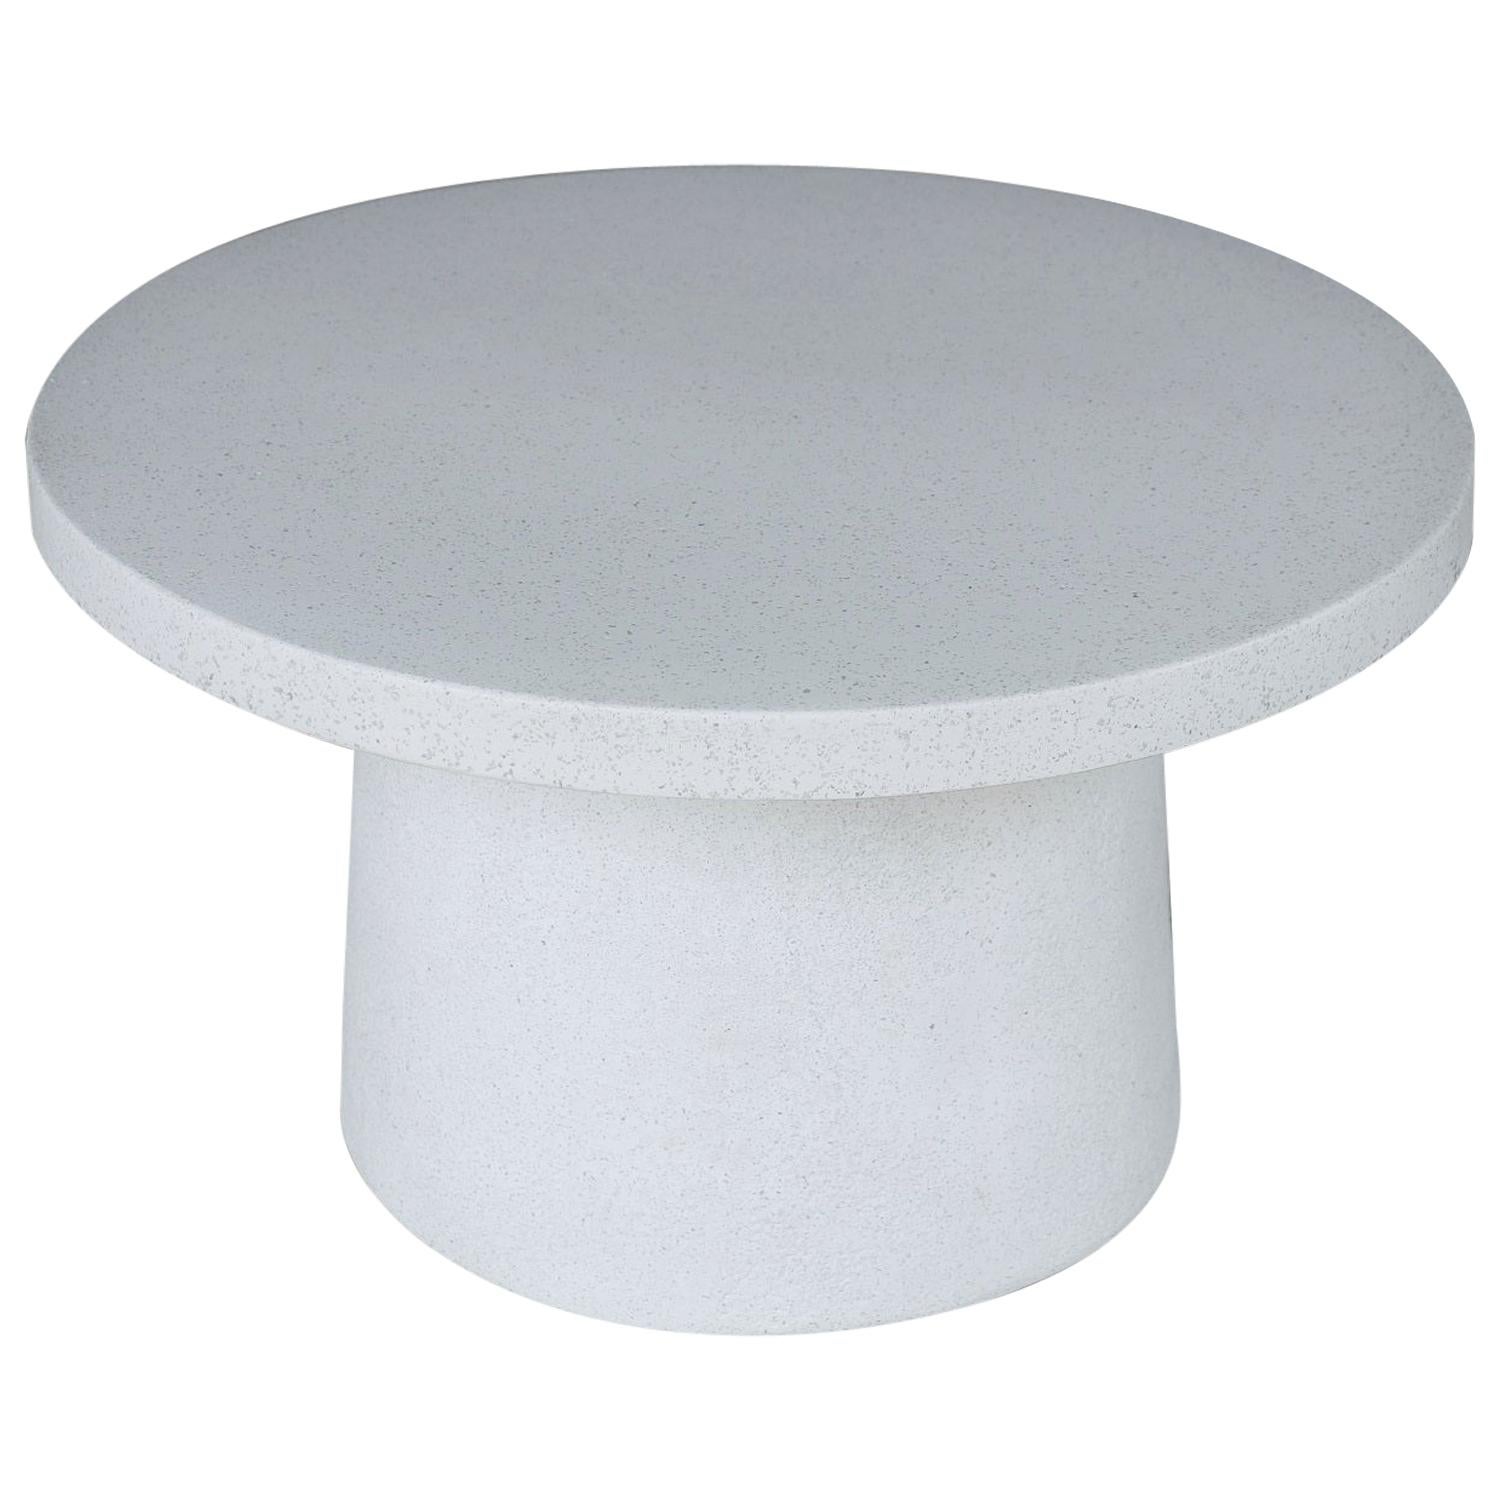 Cast Resin 'Hive' Low Table, White Stone Finish by Zachary A. Design